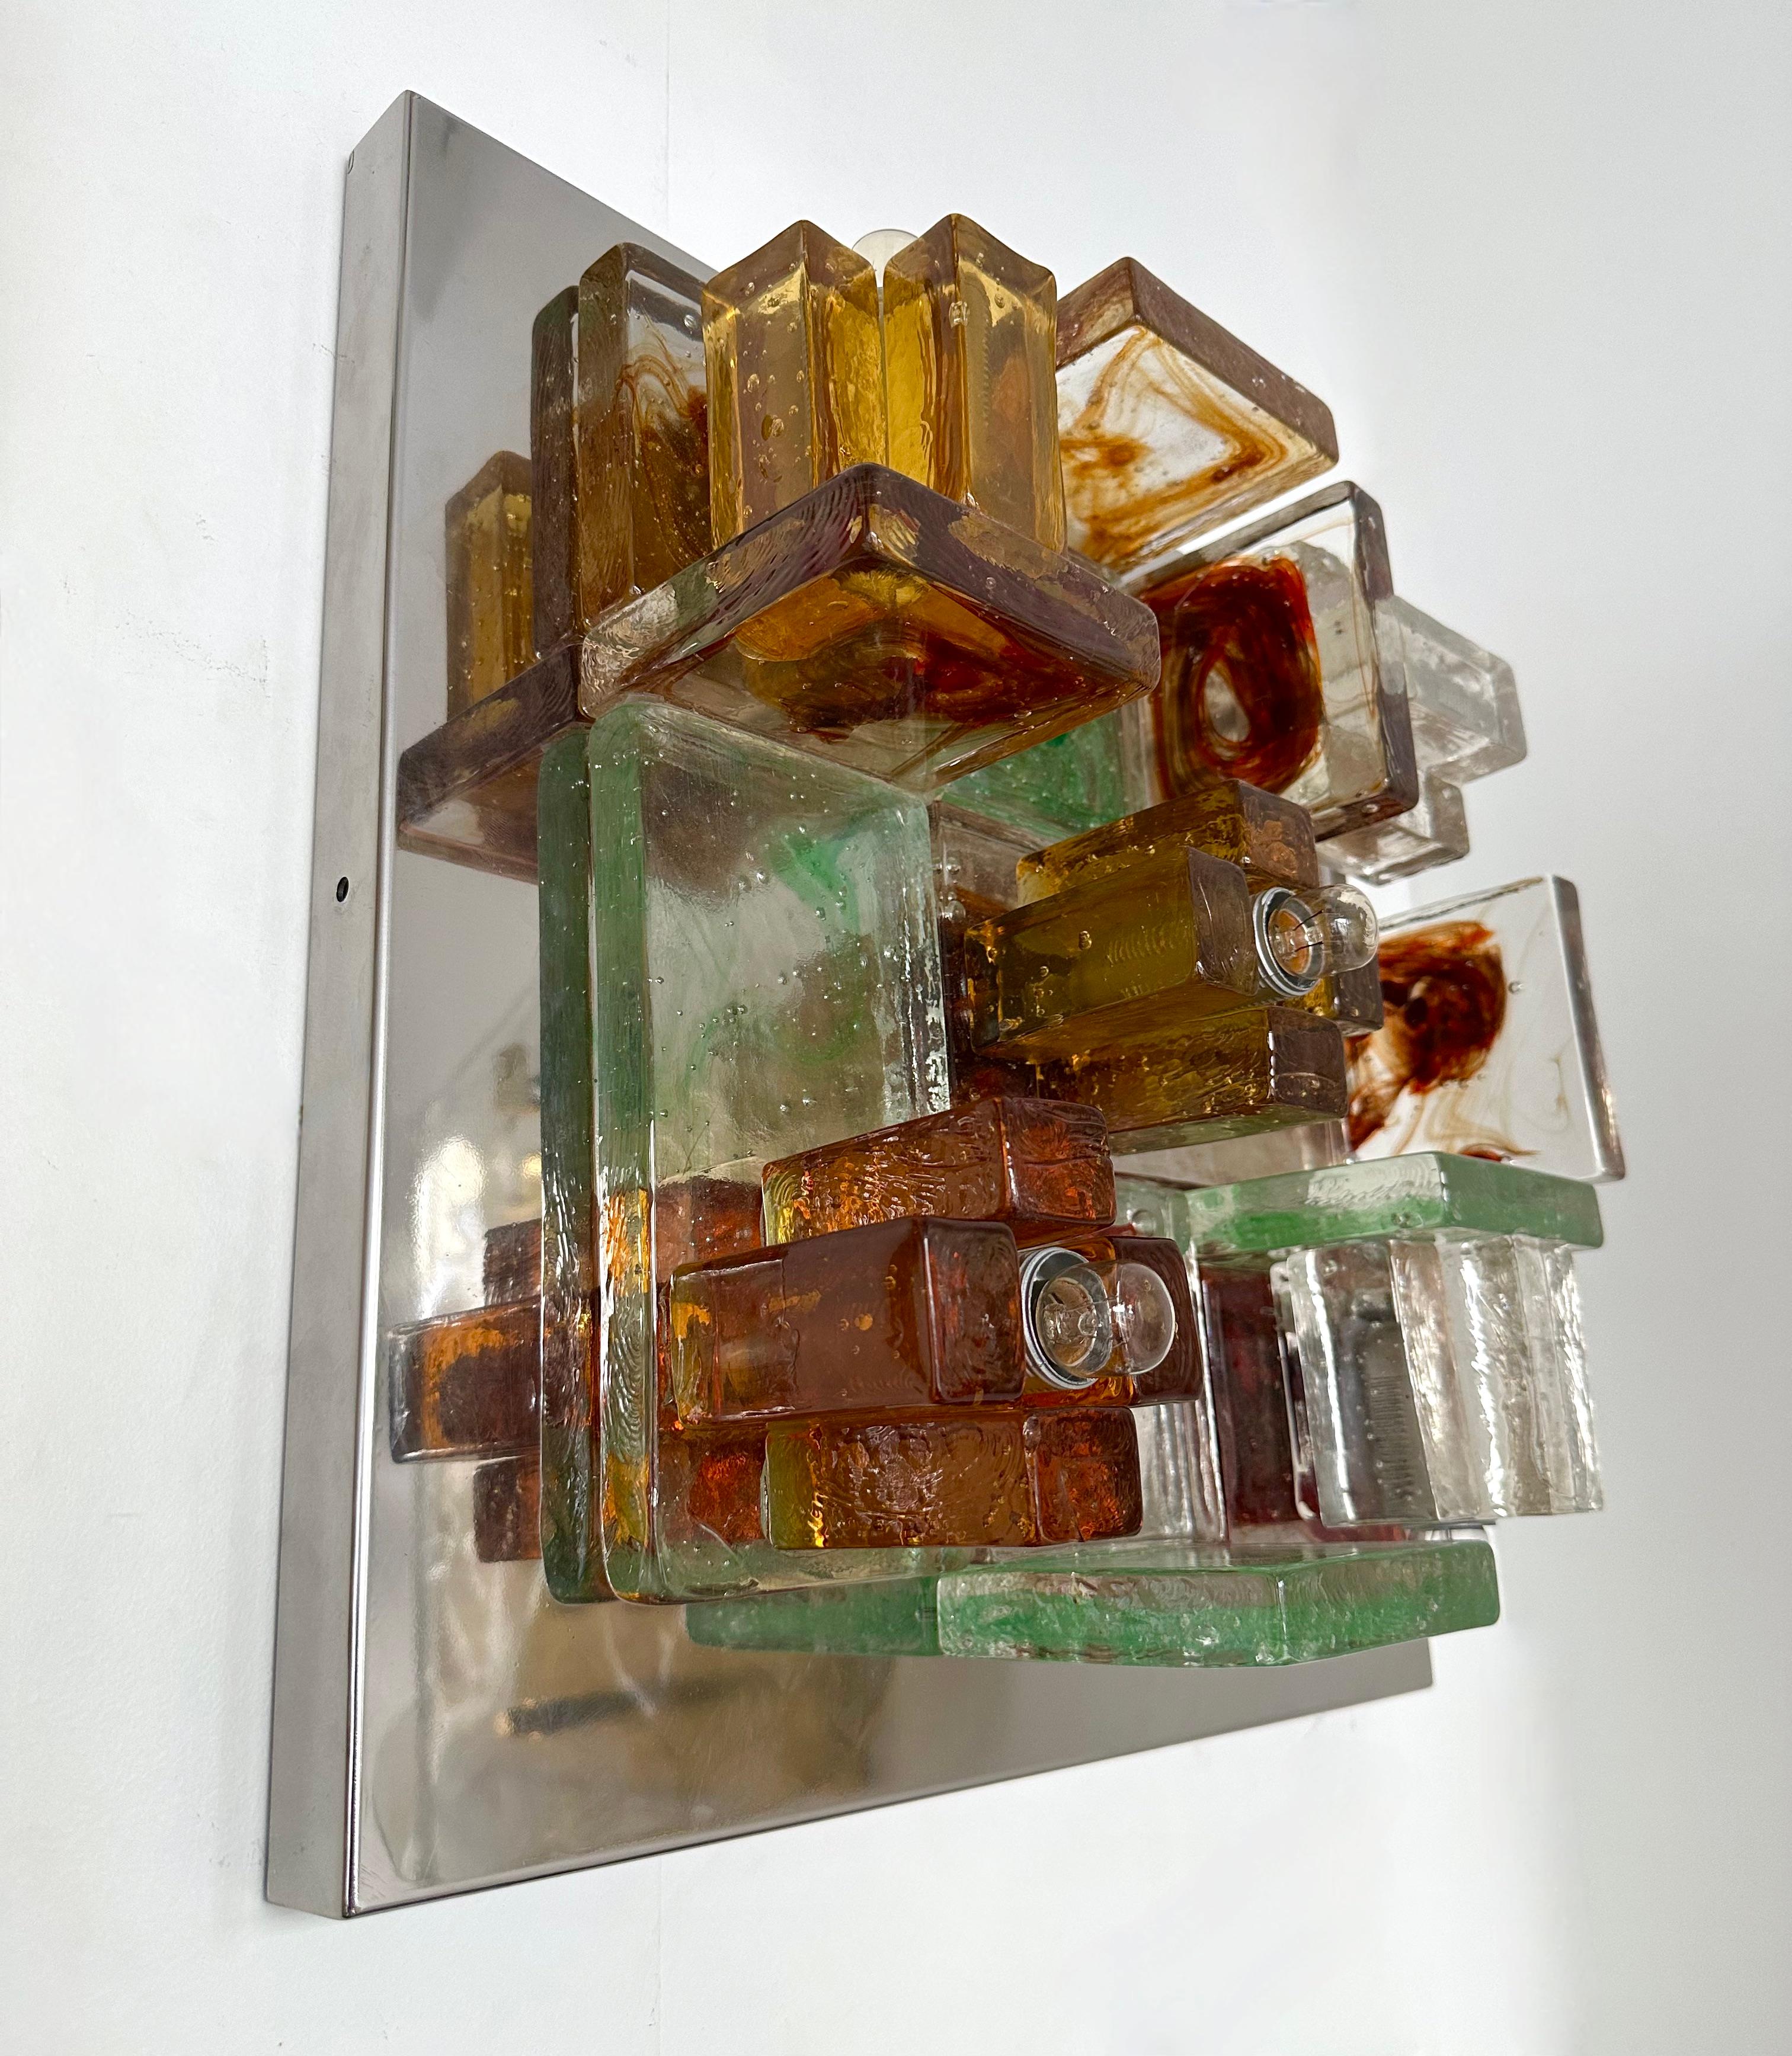 Pressed Pair of Geometry Glass Construction Metal Sconces by Poliarte, Italy, 1970s For Sale